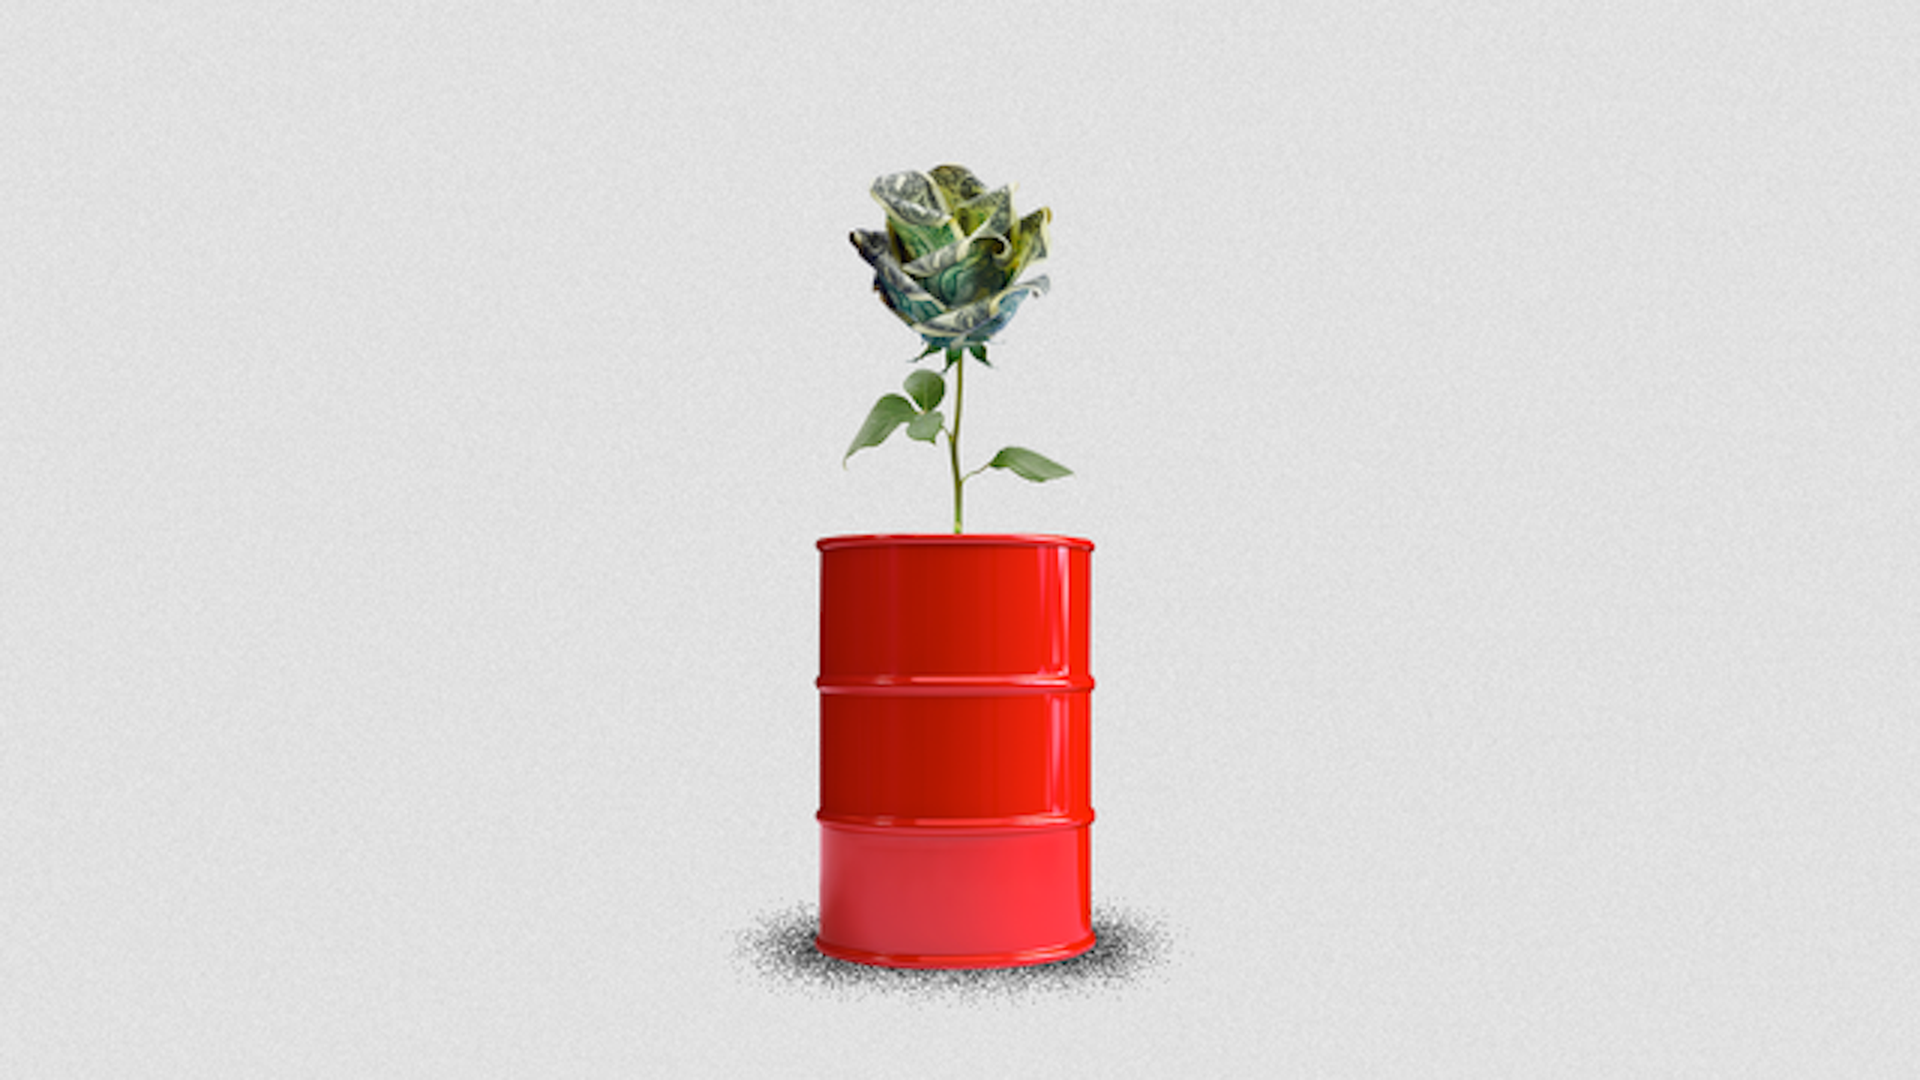 Illustration of a money plant sprouting out an oil container